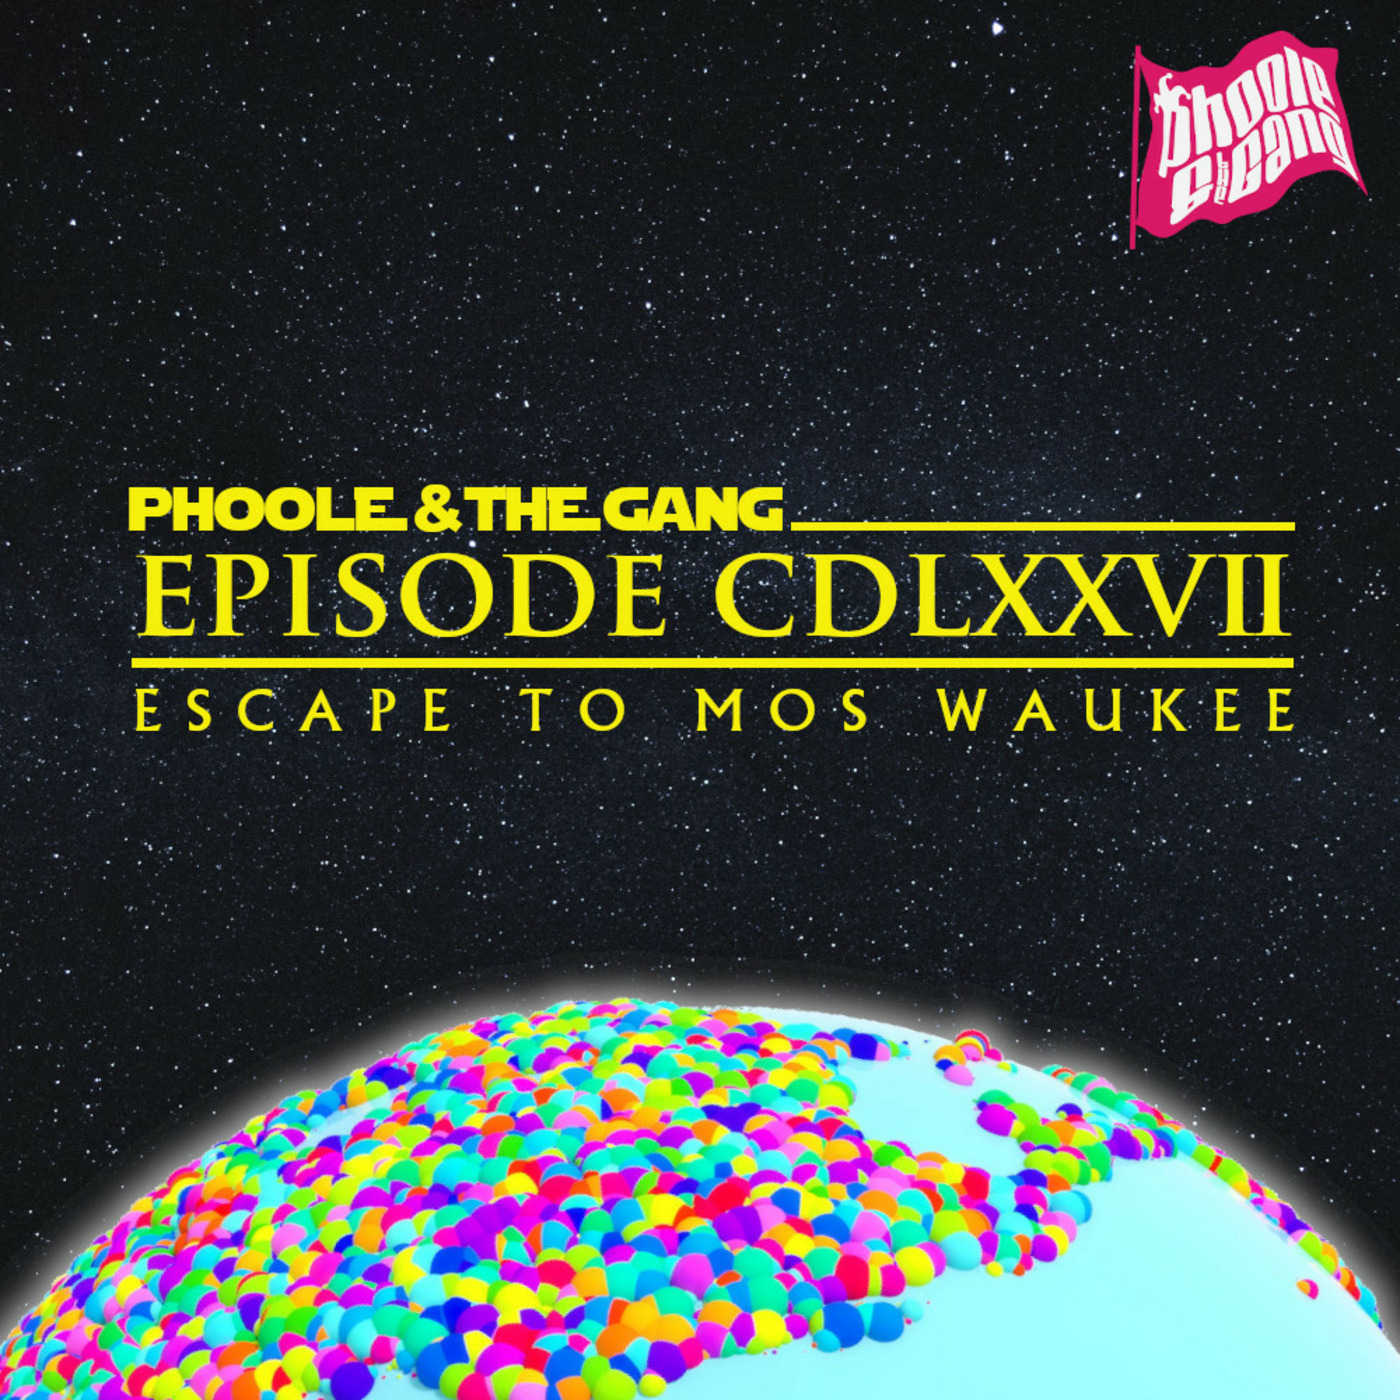 Just the Music from Escape to Mos Waukee! Phoole and the Gang 477